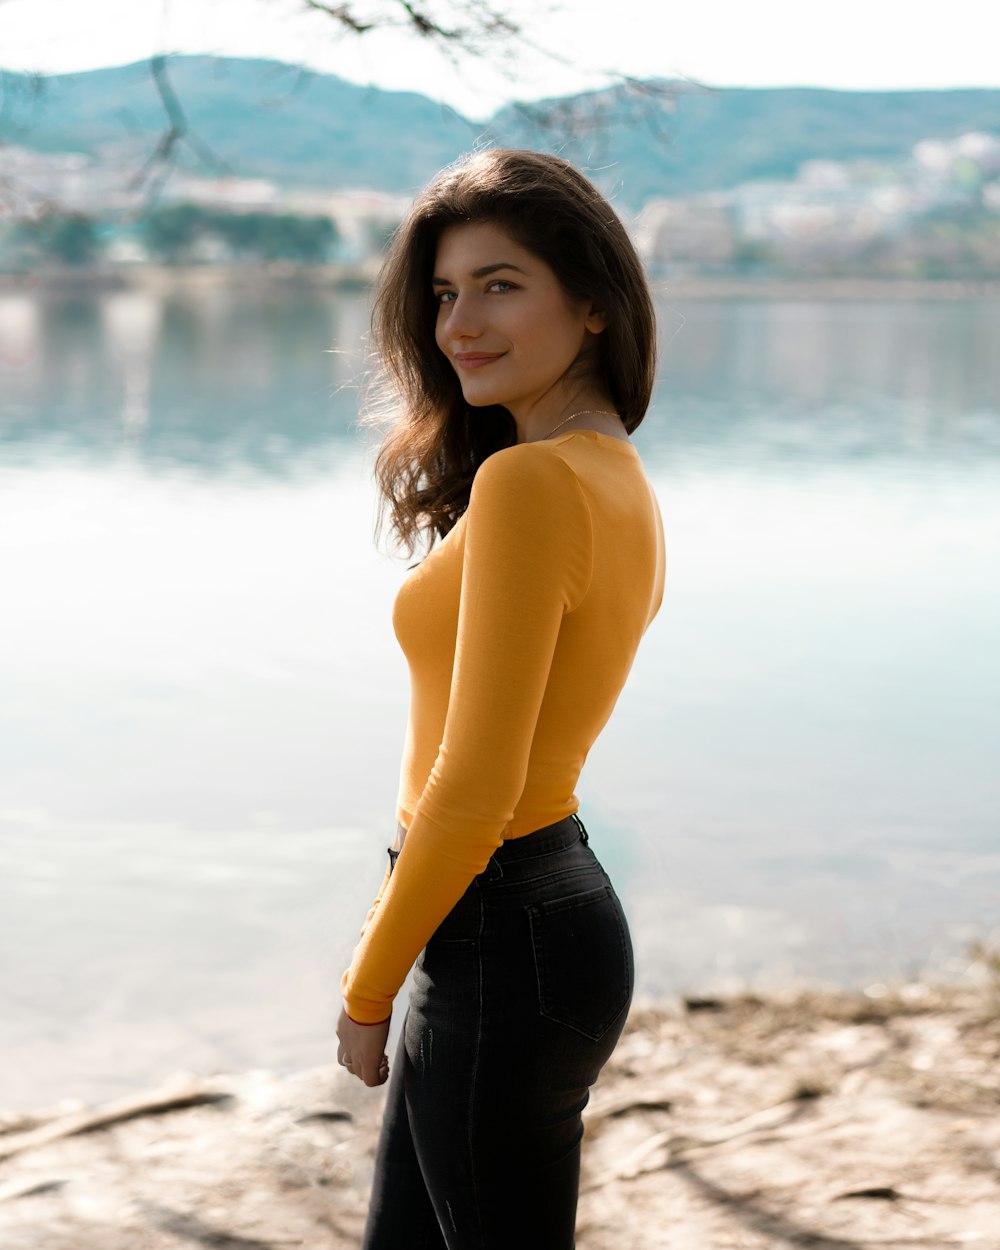 woman in yellow long sleeve shirt and black pants standing on beach during daytime